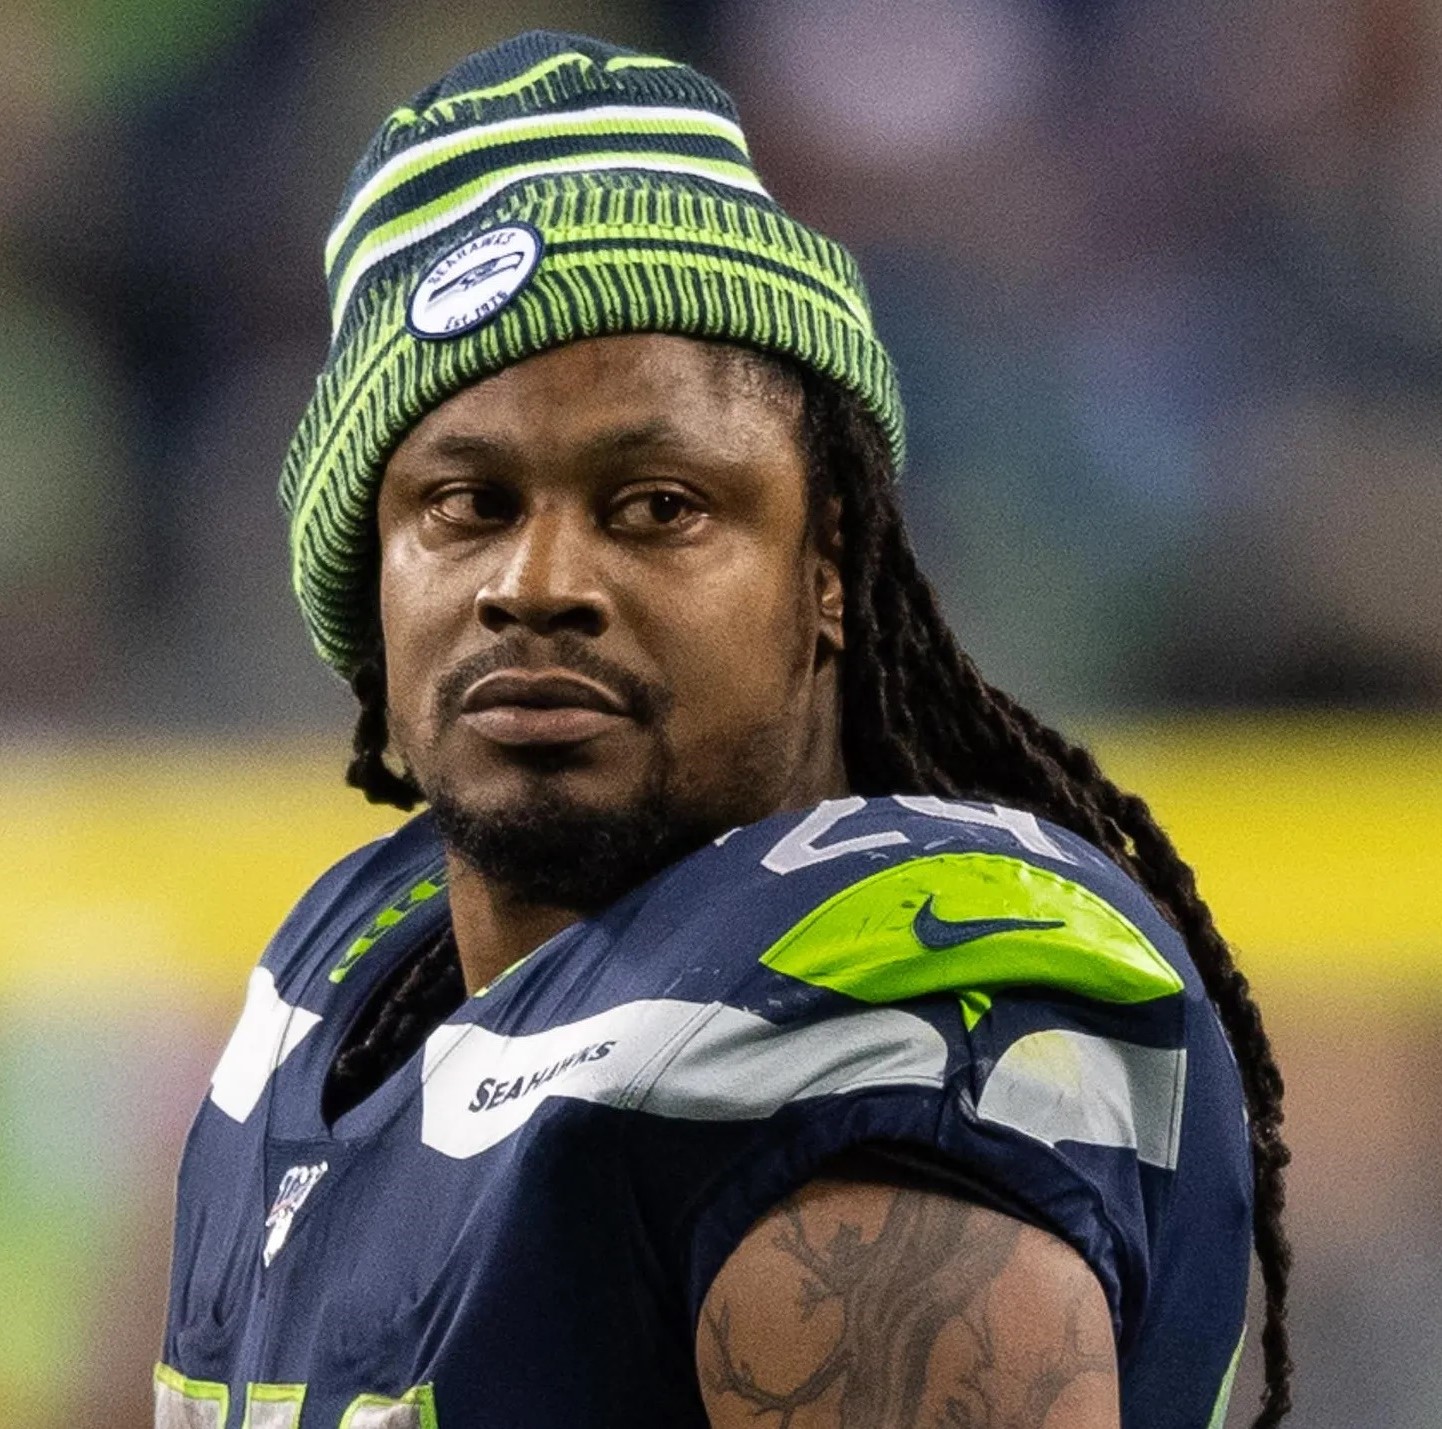 Ex-NFL RB Marshawn Lynch Pulled Out From Car During DUI Arrest, Police Bodycam Video Released